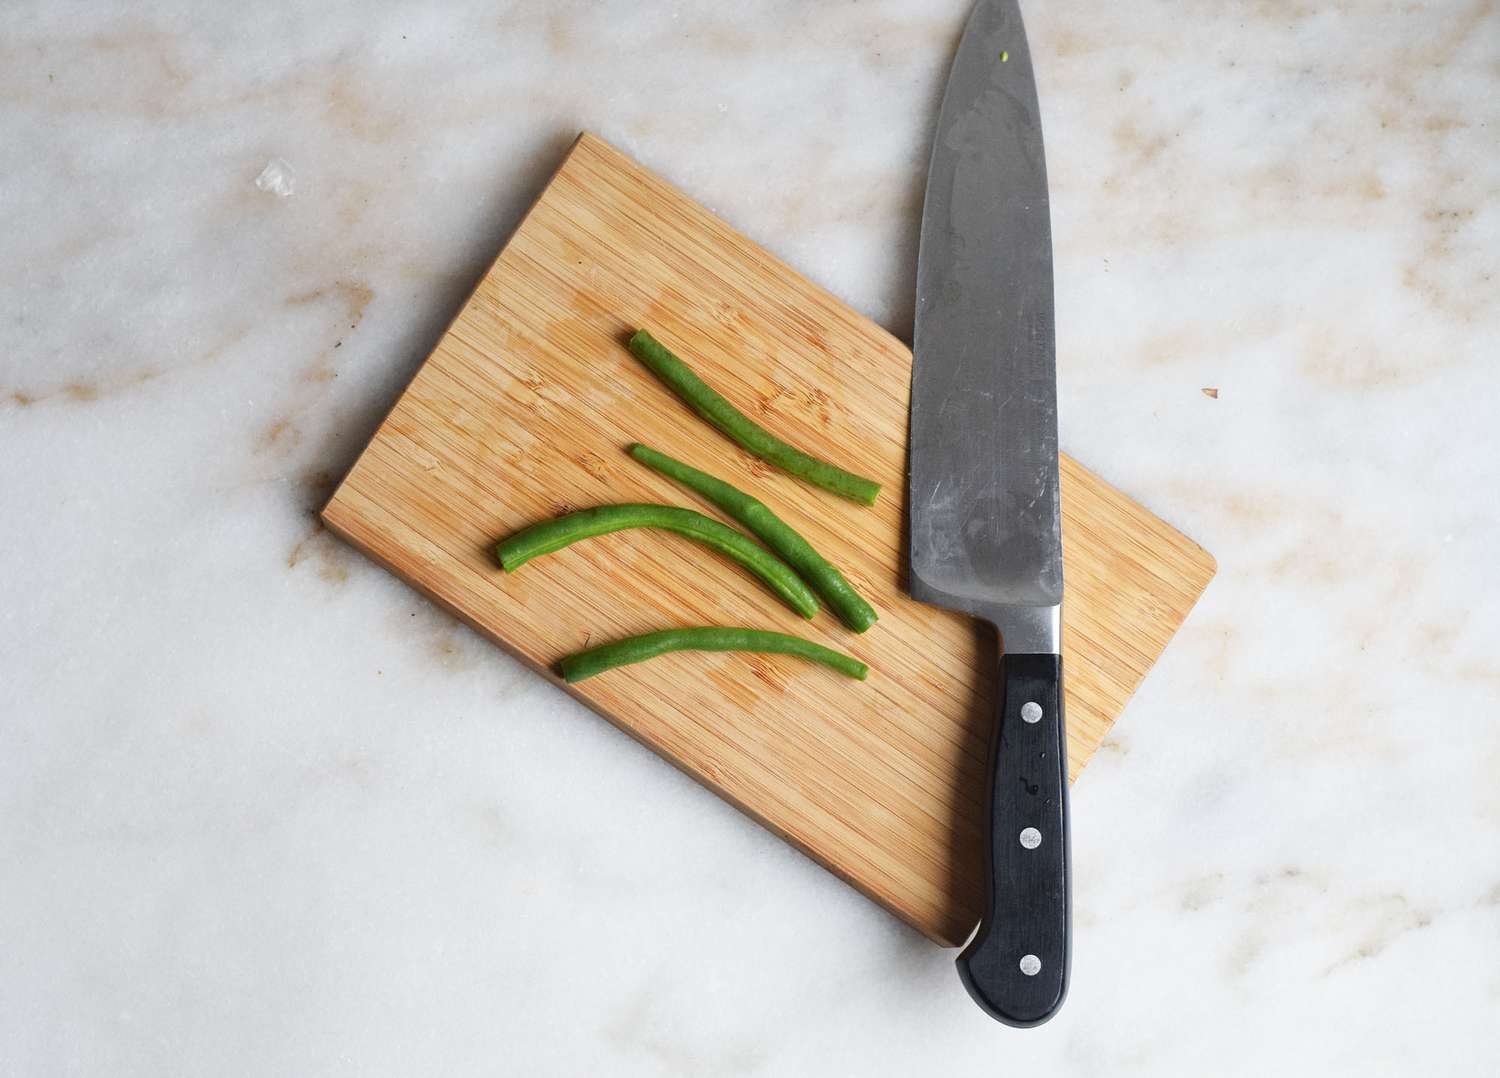 green beans trimmed on a cutting board